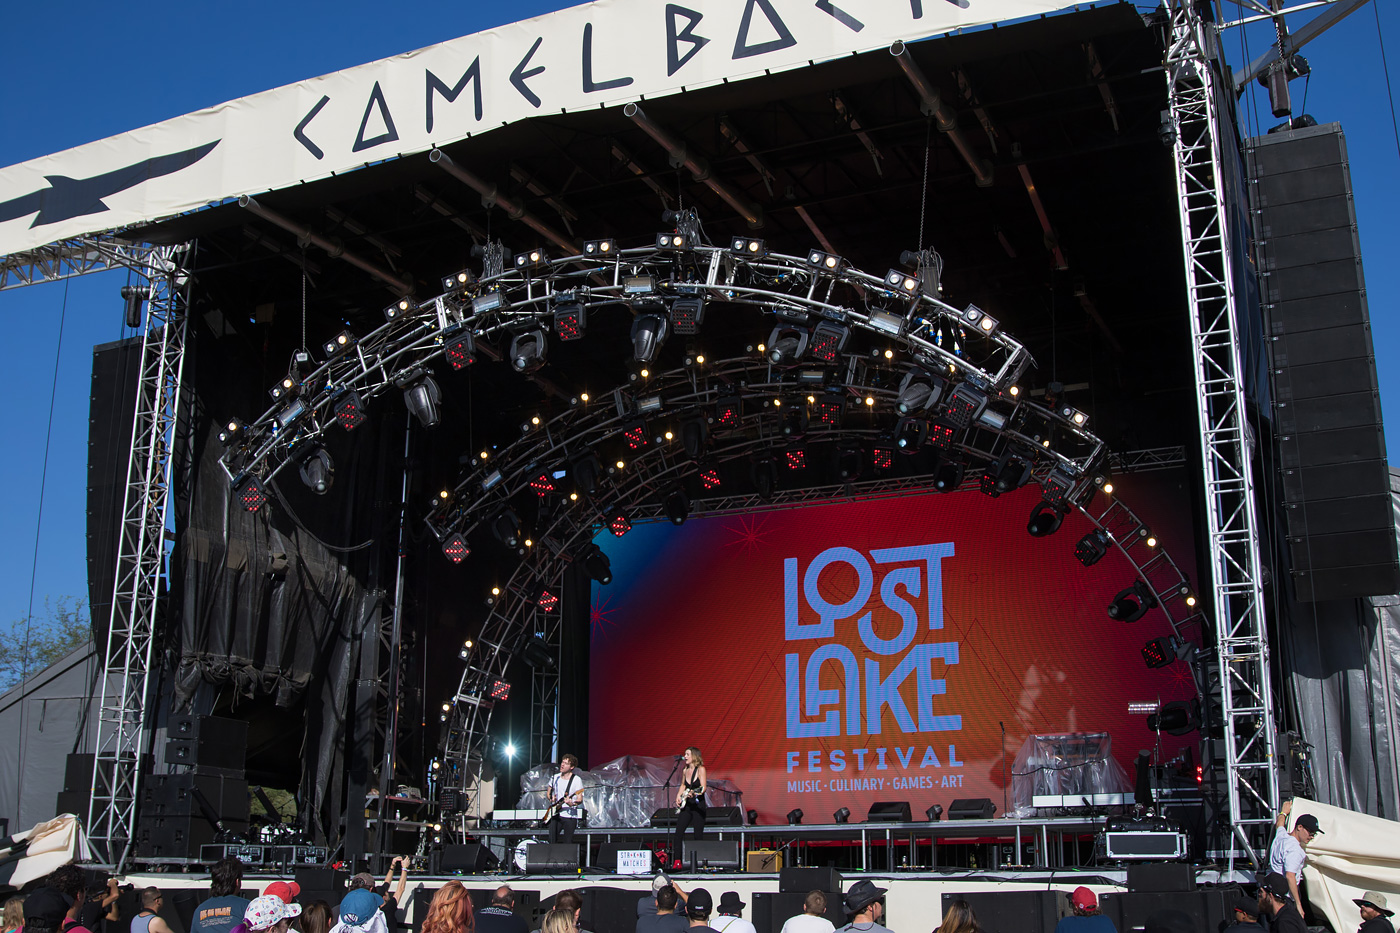 Concert Photos from Lost Lake Festival Phoenix 2017